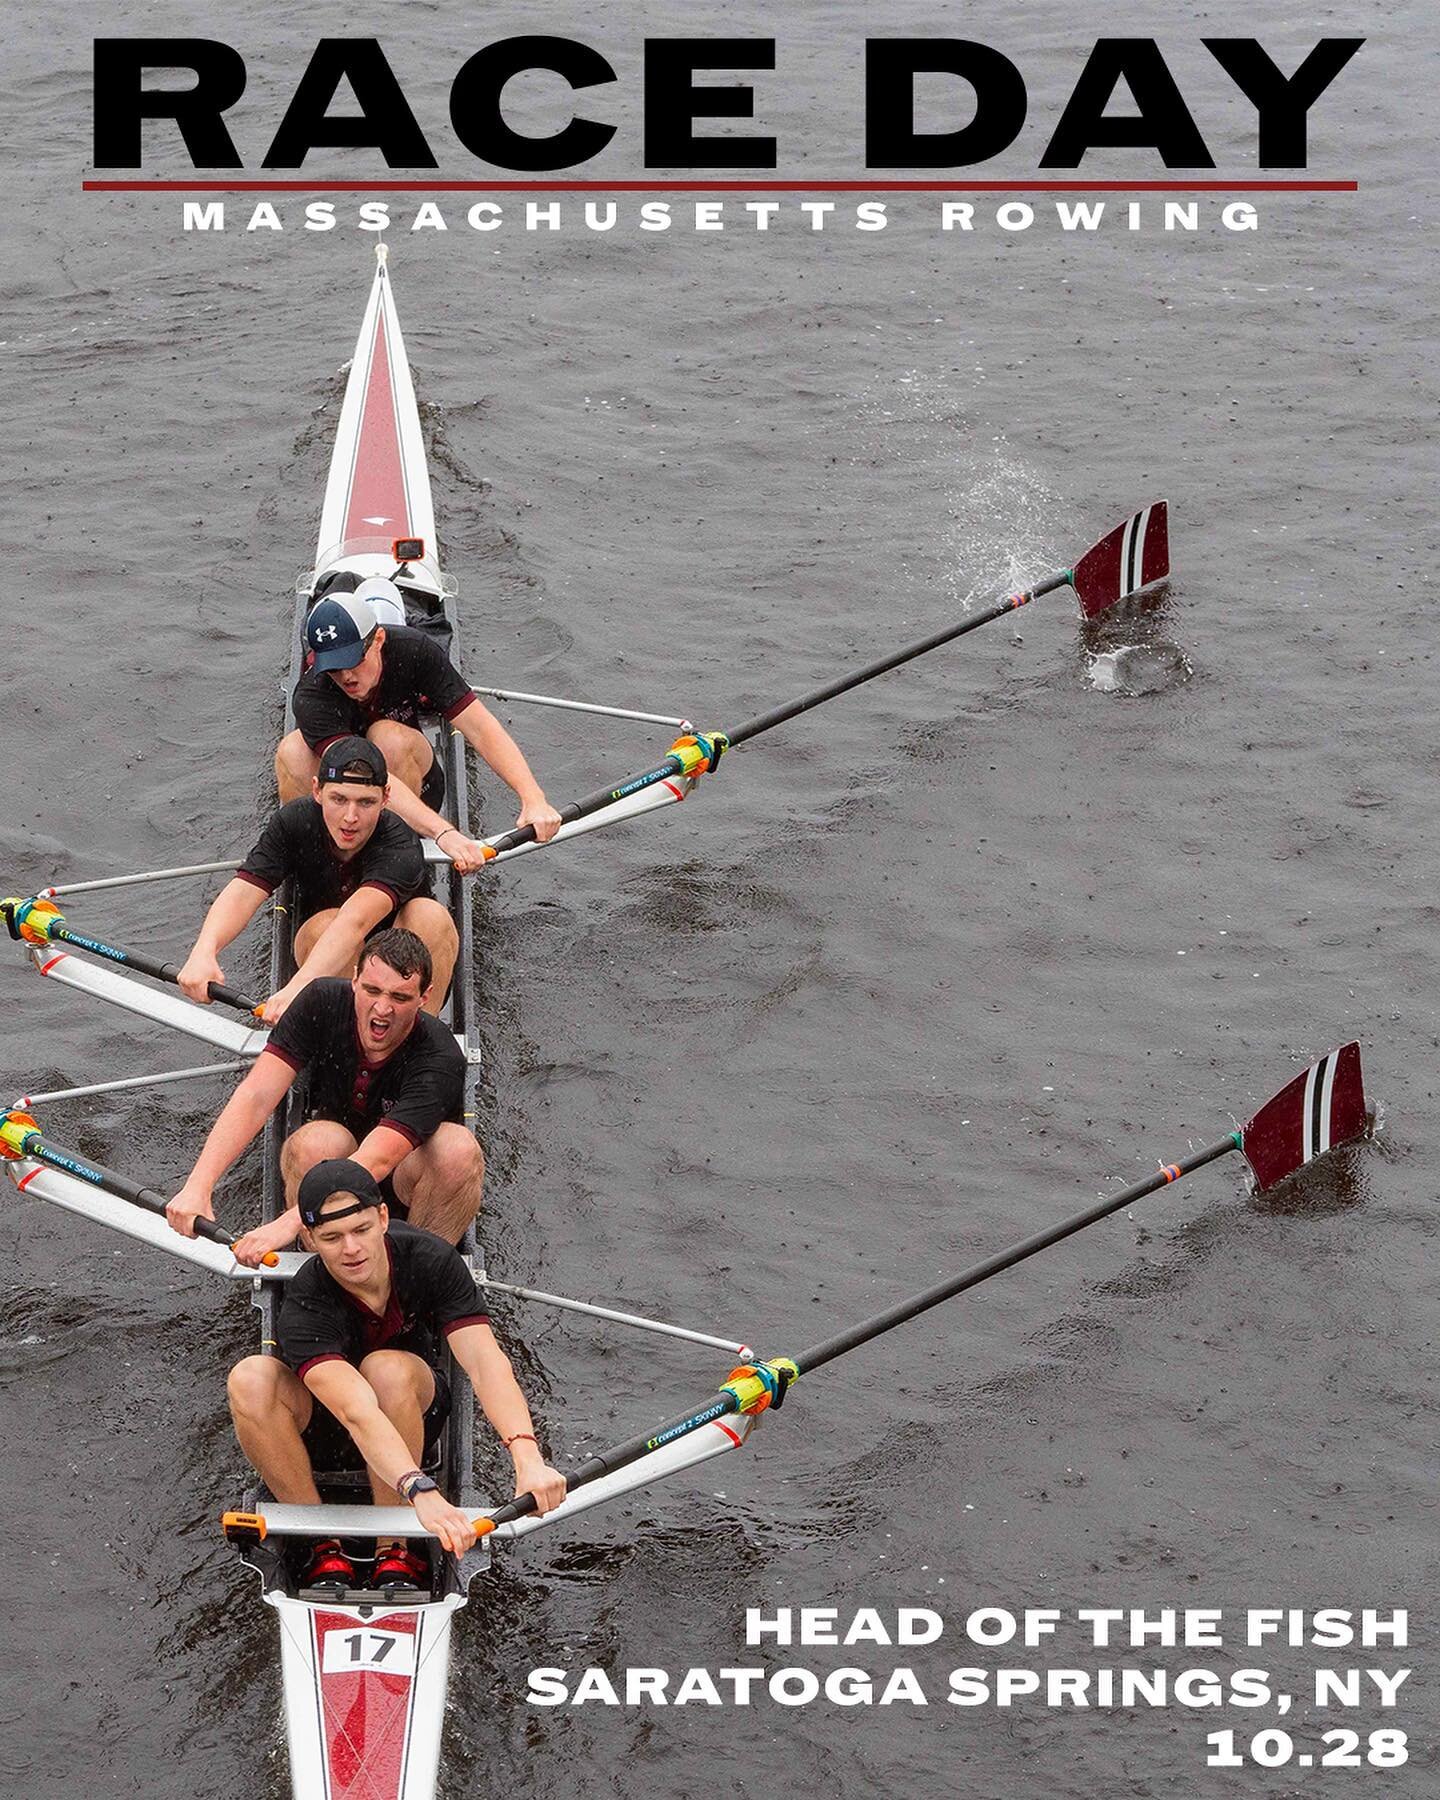 The last race of the fall season is tomorrow is Saratoga Spring, NY, for the Head of the Fish. Nine boats will be making their way down the course, comprised of pairs, quads, fours, and eights.

Go Aggies!